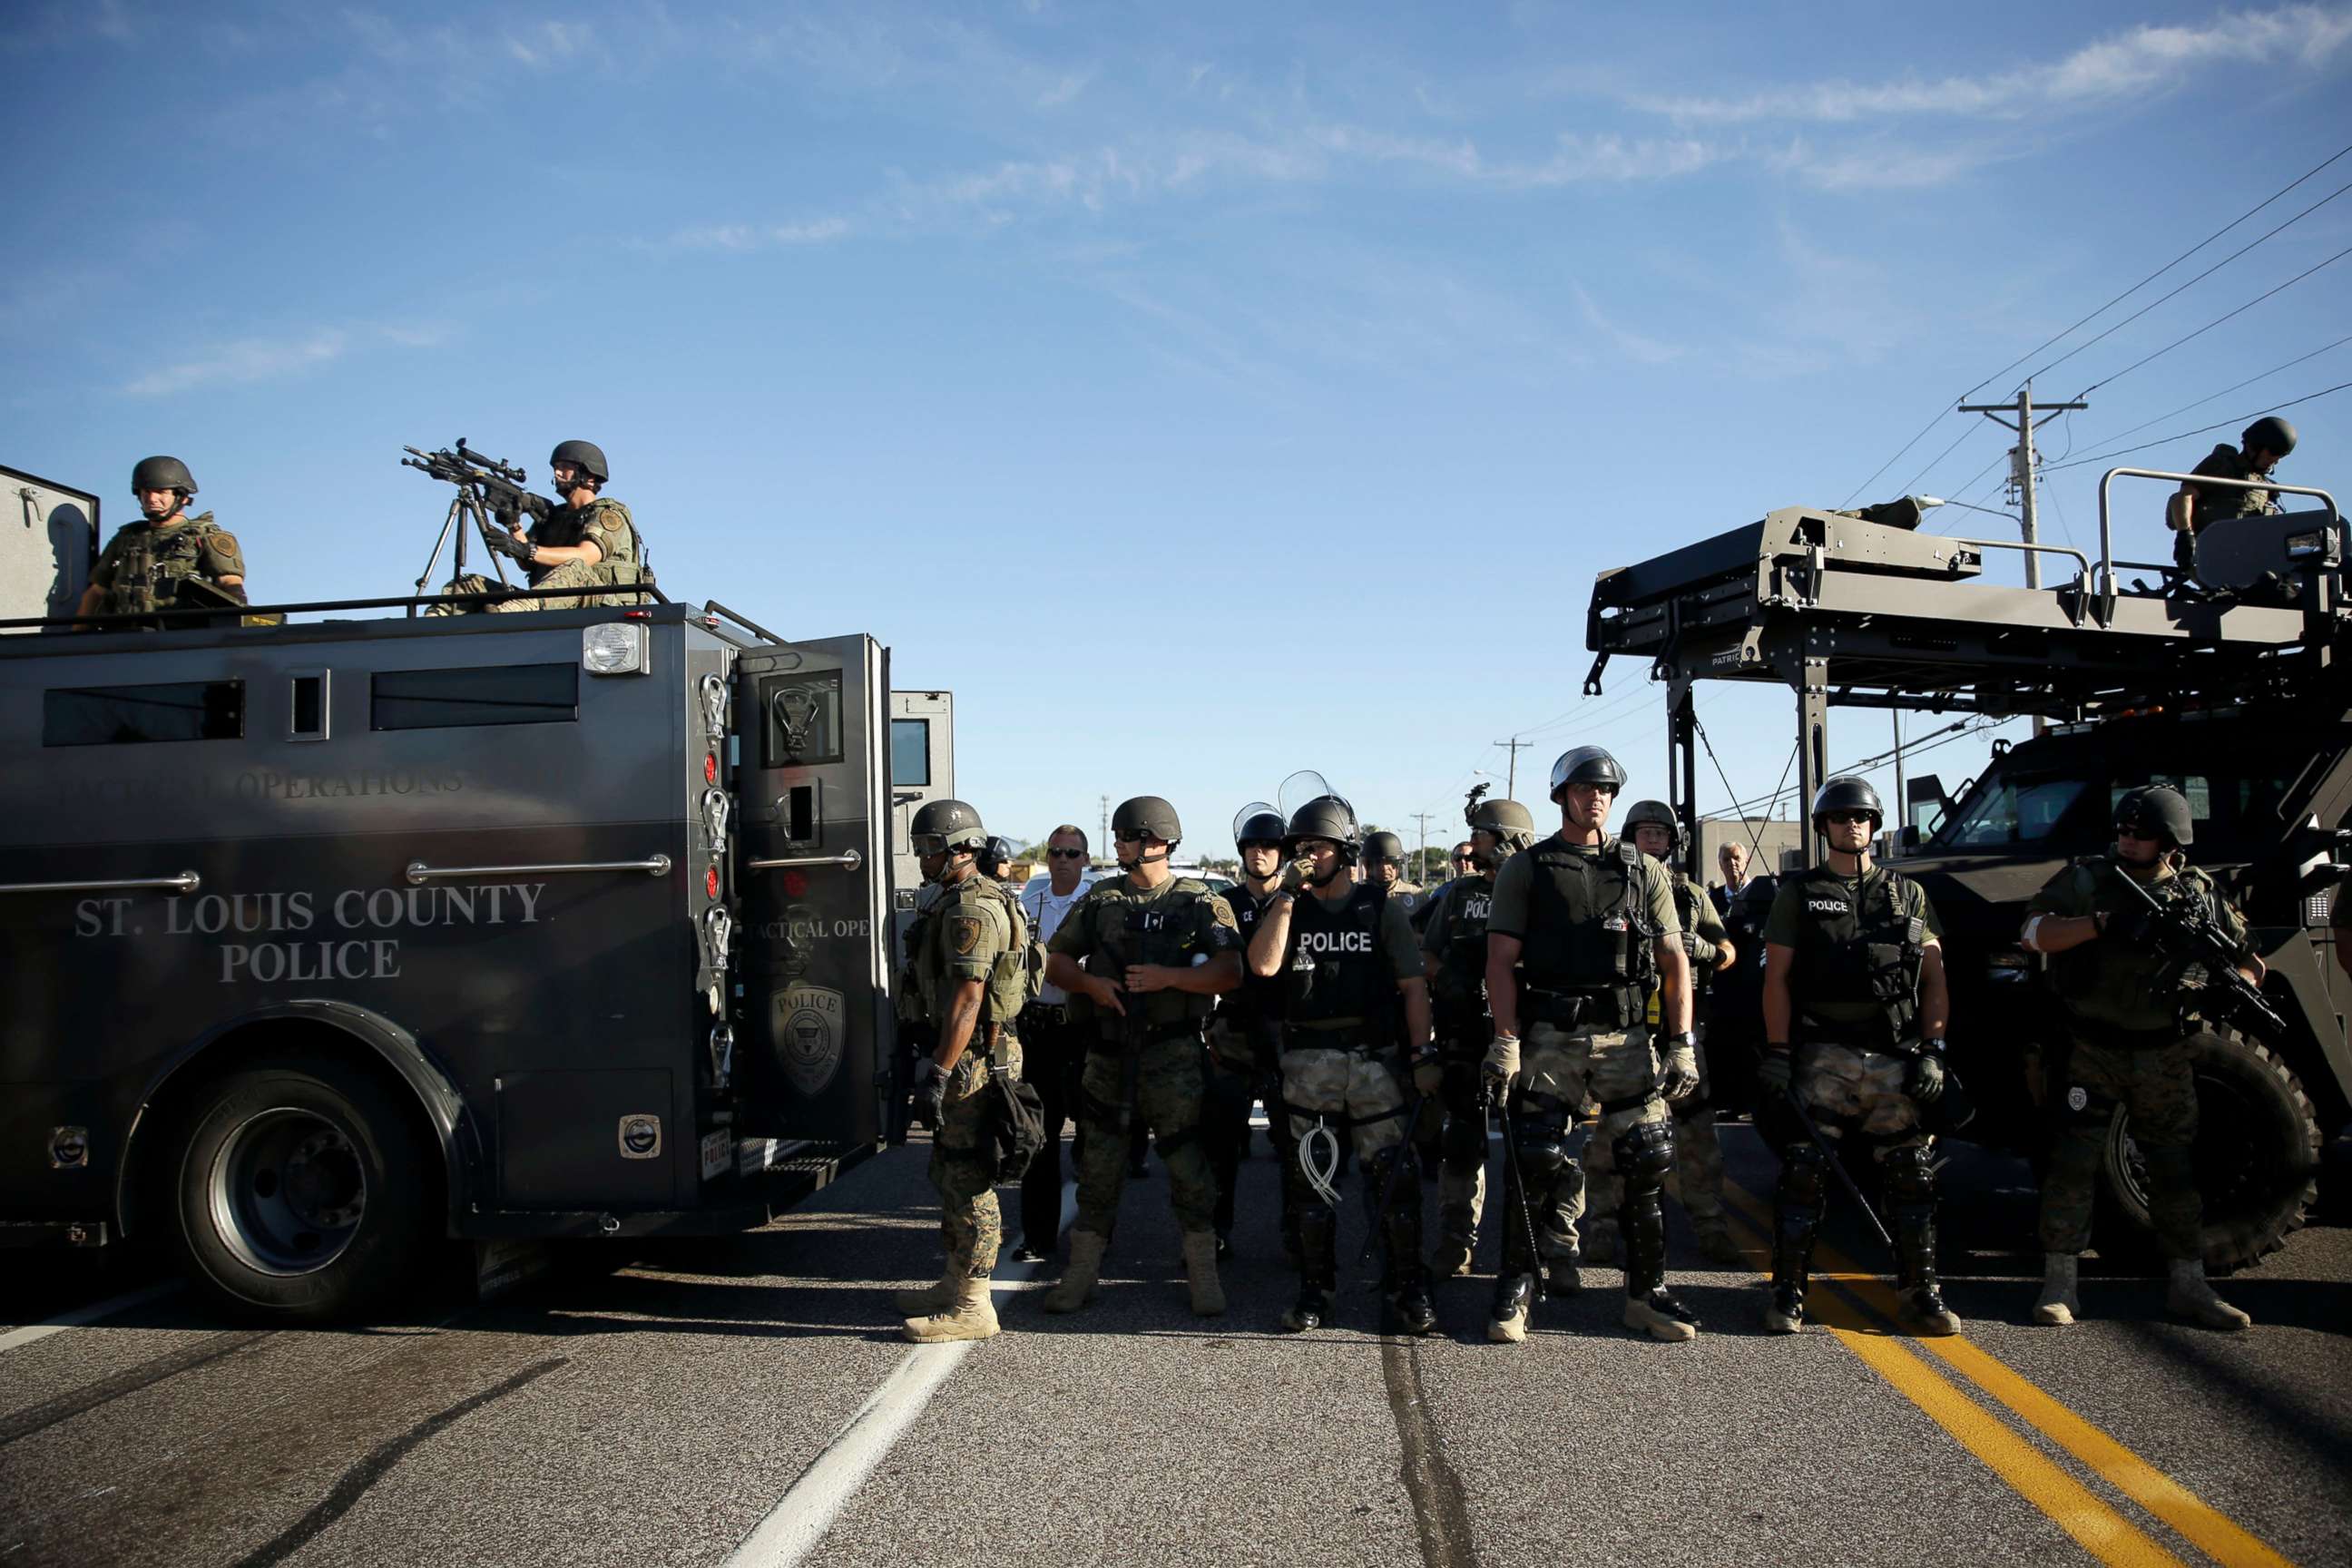 PHOTO: In this Aug. 13, 2014, file photo, police in riot gear watch protesters in Ferguson, Mo., during protests after the shooting of Michael Brown.